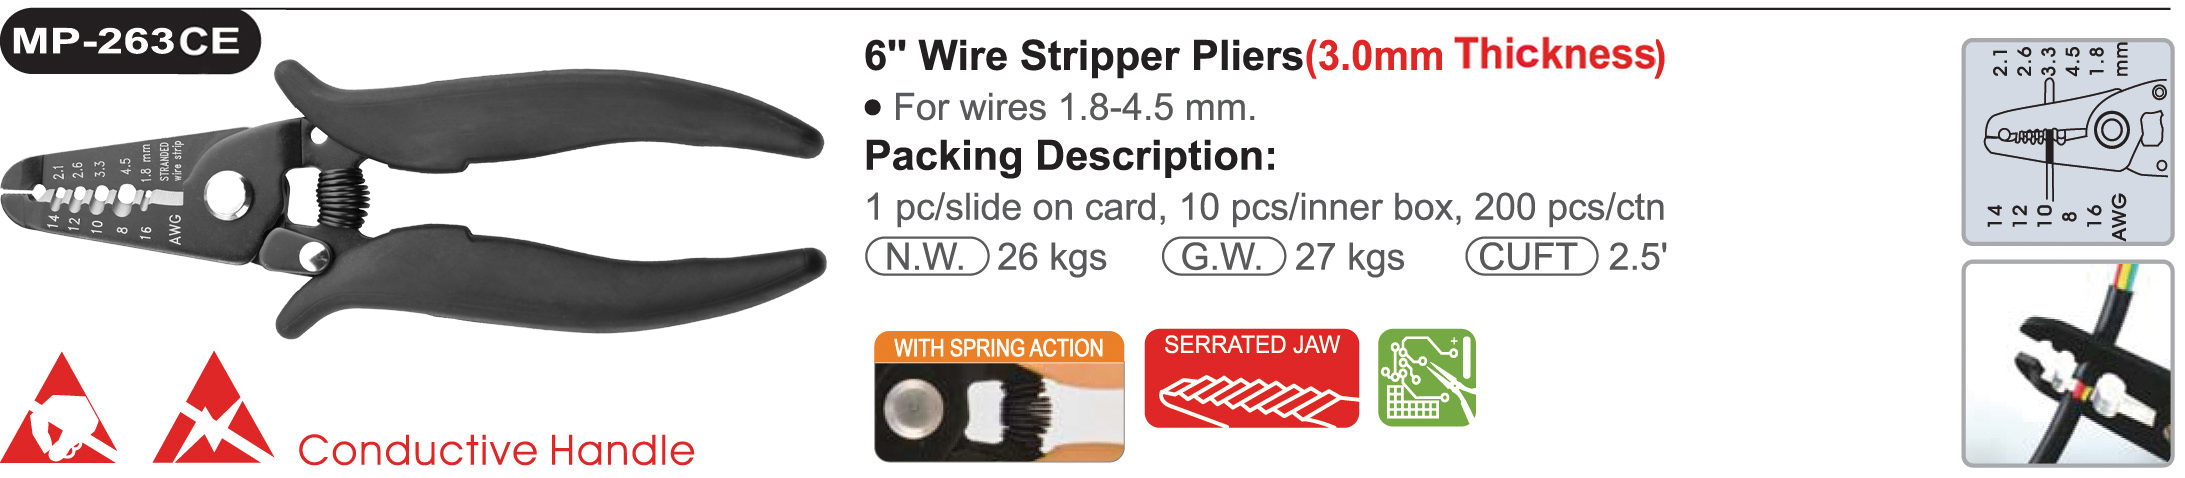 proimages/product/pliers/wire_strippers/ELECTRONICS_WIRE_STRIPPER_ESD/MP-263CE/MP-263CE.jpg